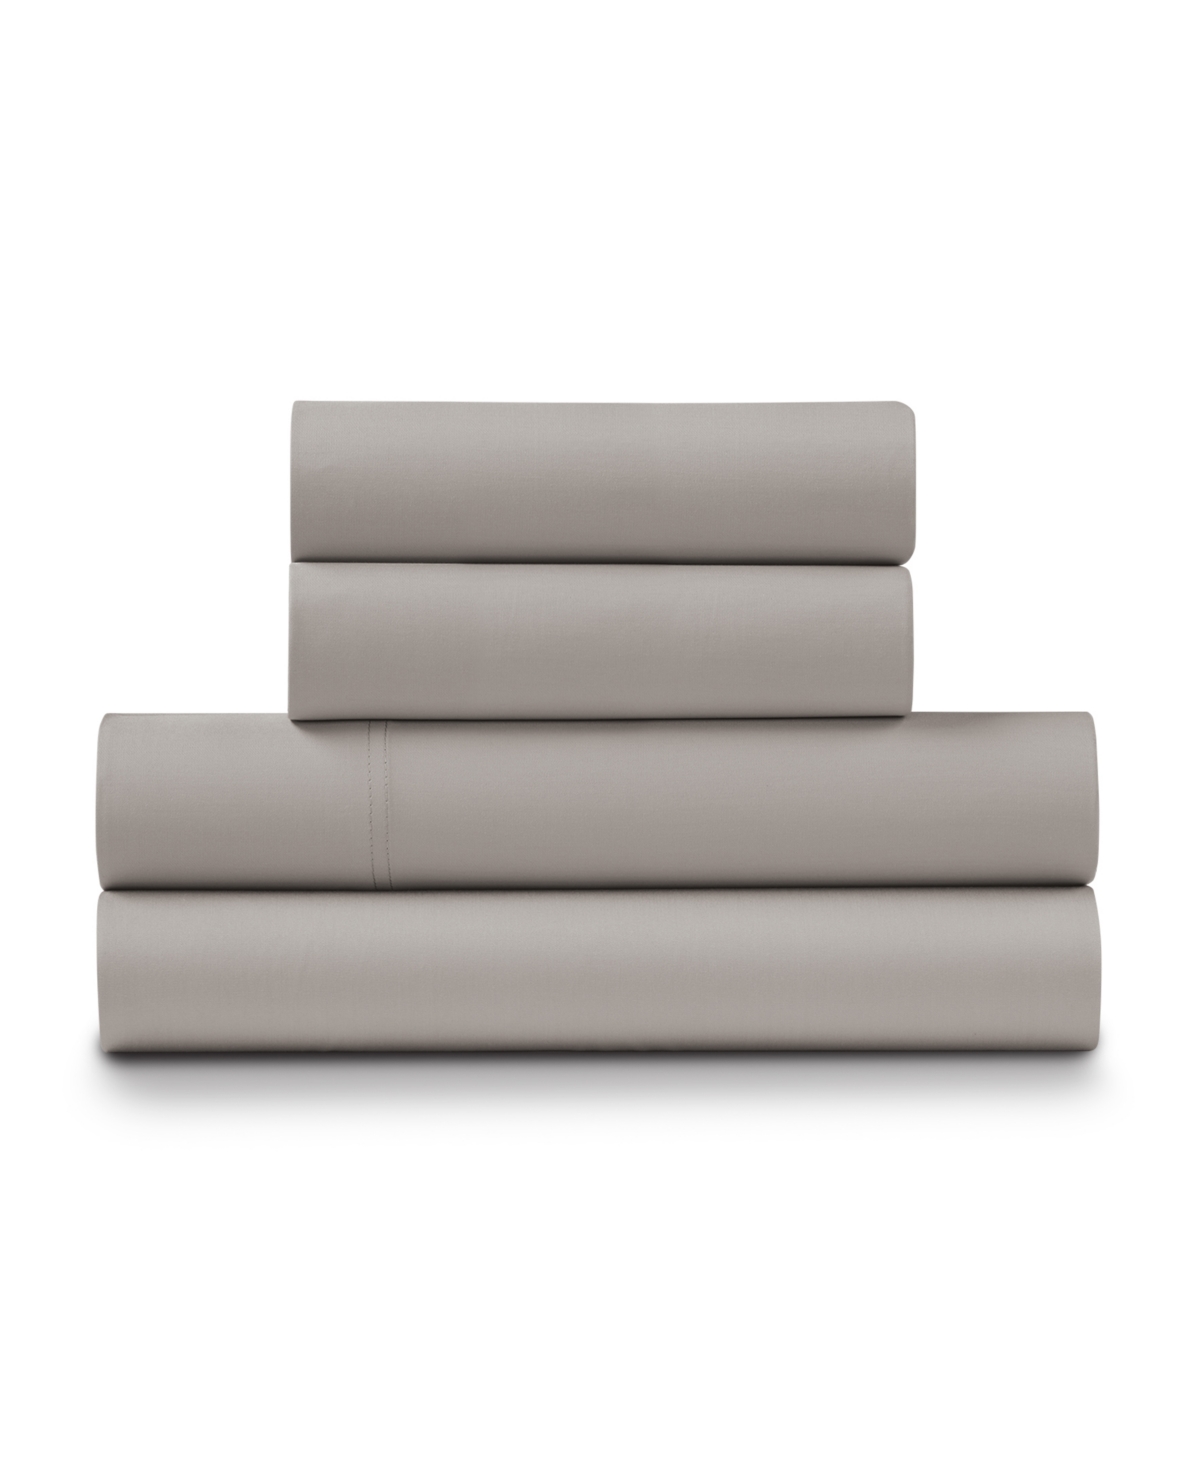 Ella Jayne Viscose From Bamboo 4 Piece Sheet Set, Queen In Taupe